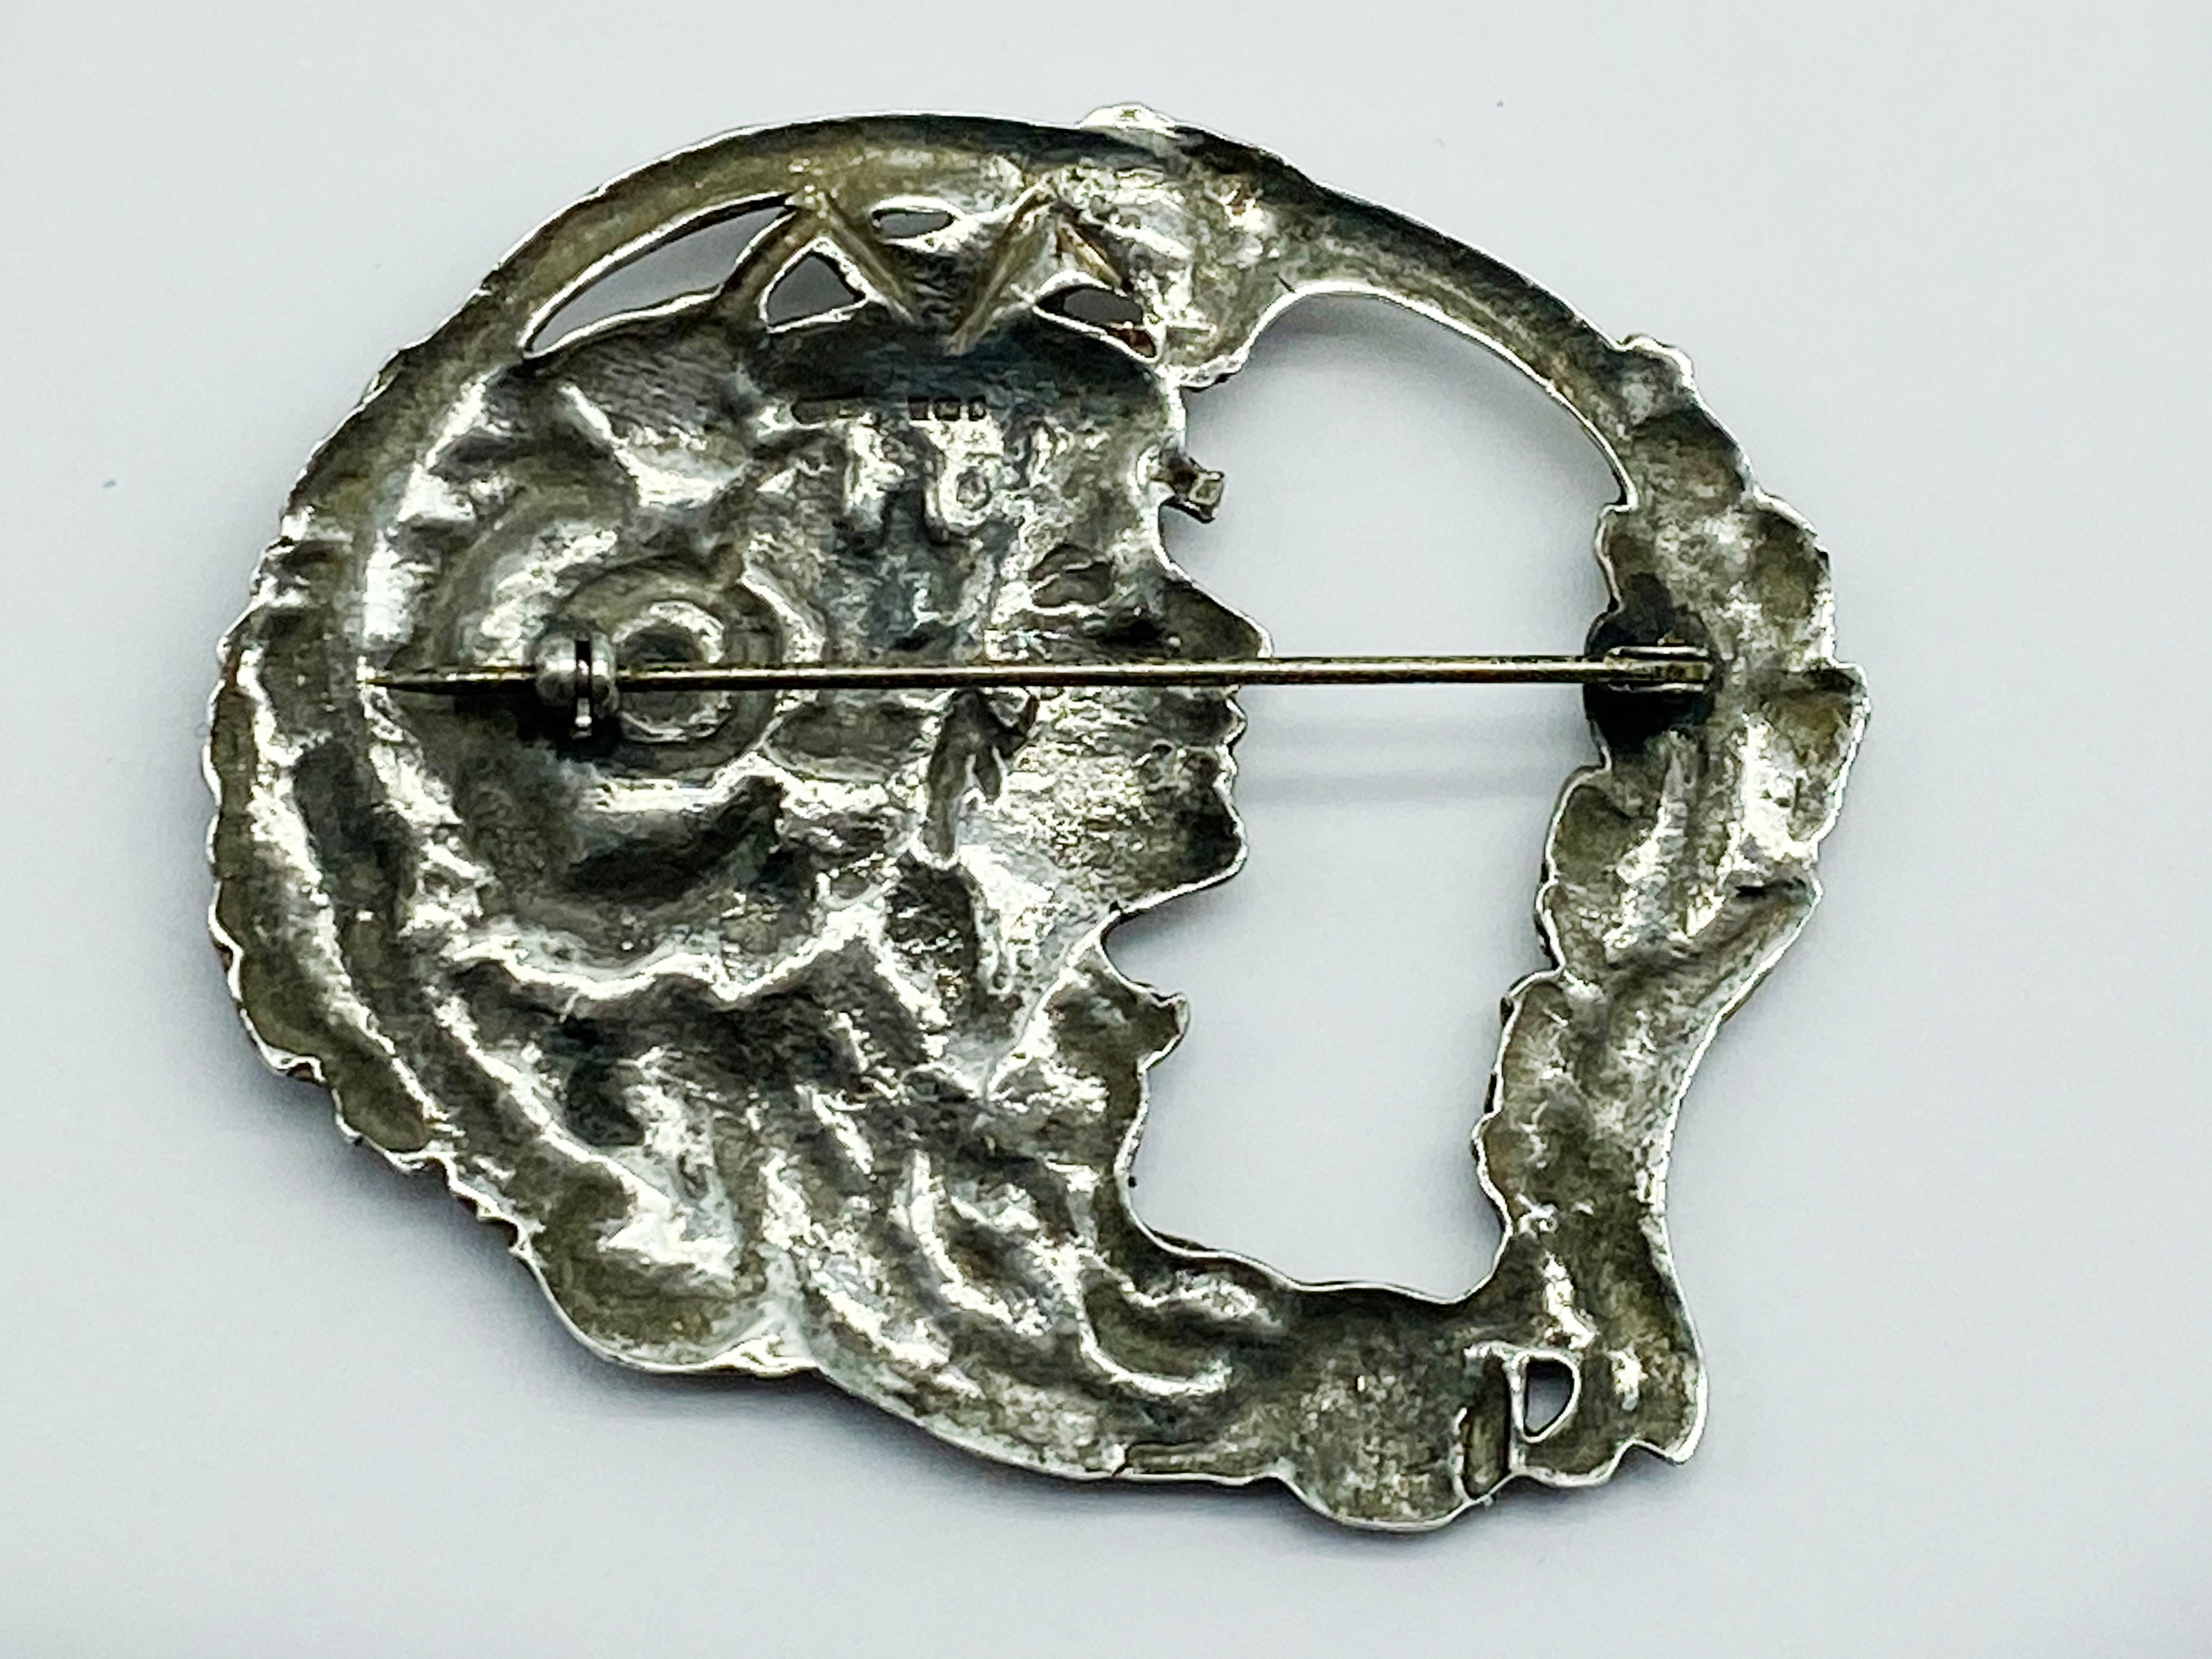 VINTAGE LARGE HALLMARKED SILVER BROOCH IN ART NOUVEAU STYLE - Image 3 of 3